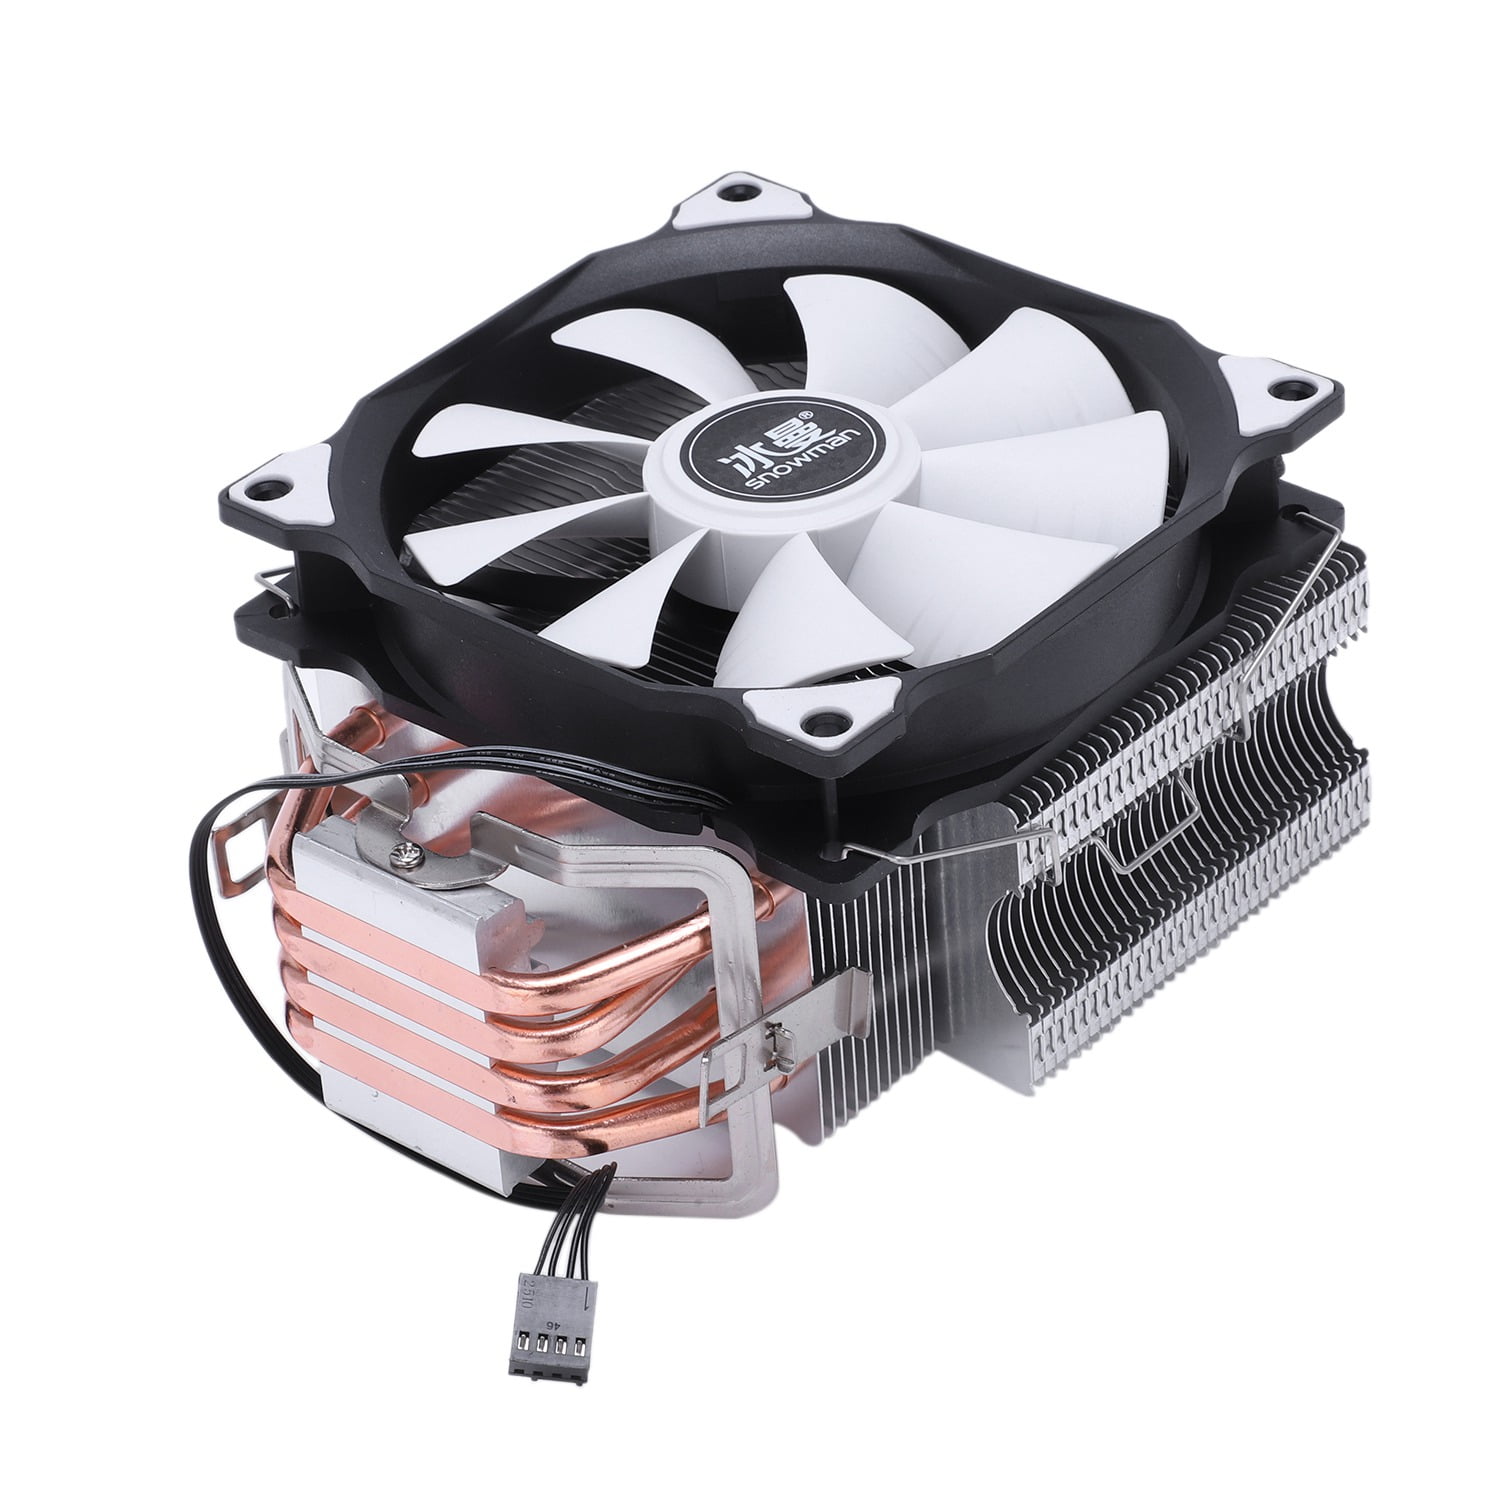 Cooler Master SNOWMAN MT-4 CPU Cooler Master 5 Direct Contact Heatpipes Freeze Tower Cool H3P2 194724075267 